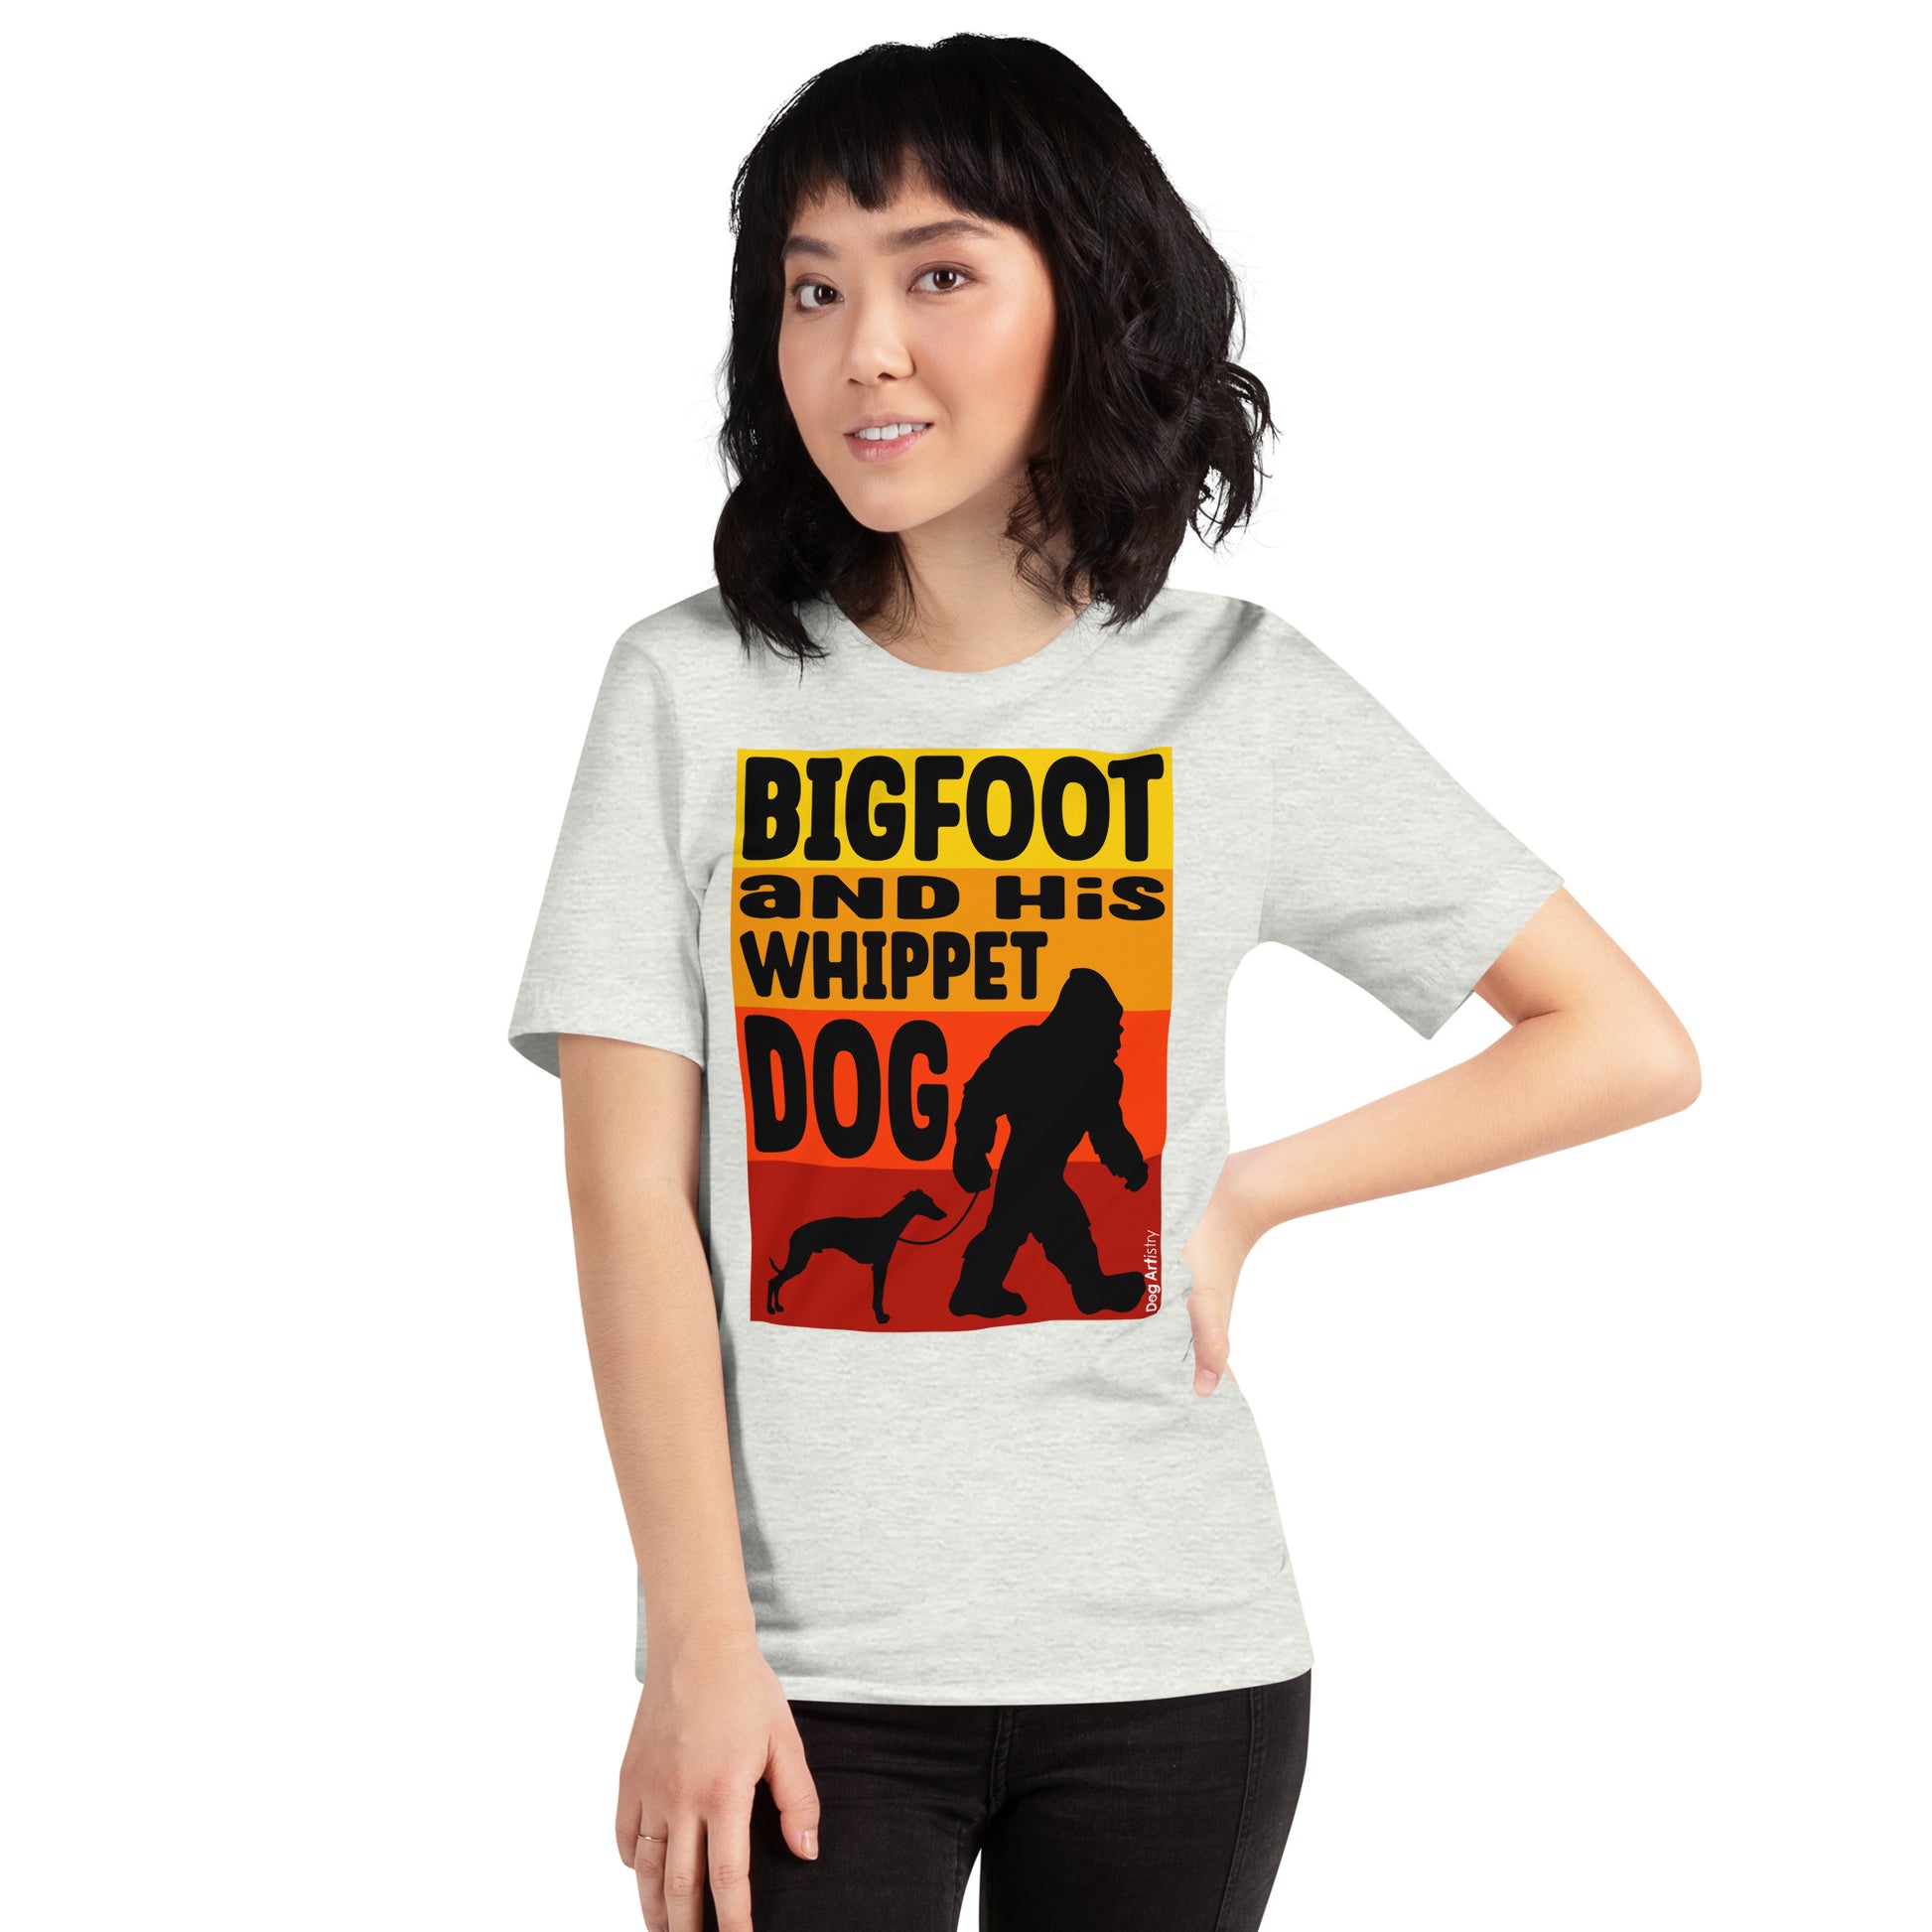 Bigfoot and his Whippet dog unisex ash t-shirt by Dog Artistry.